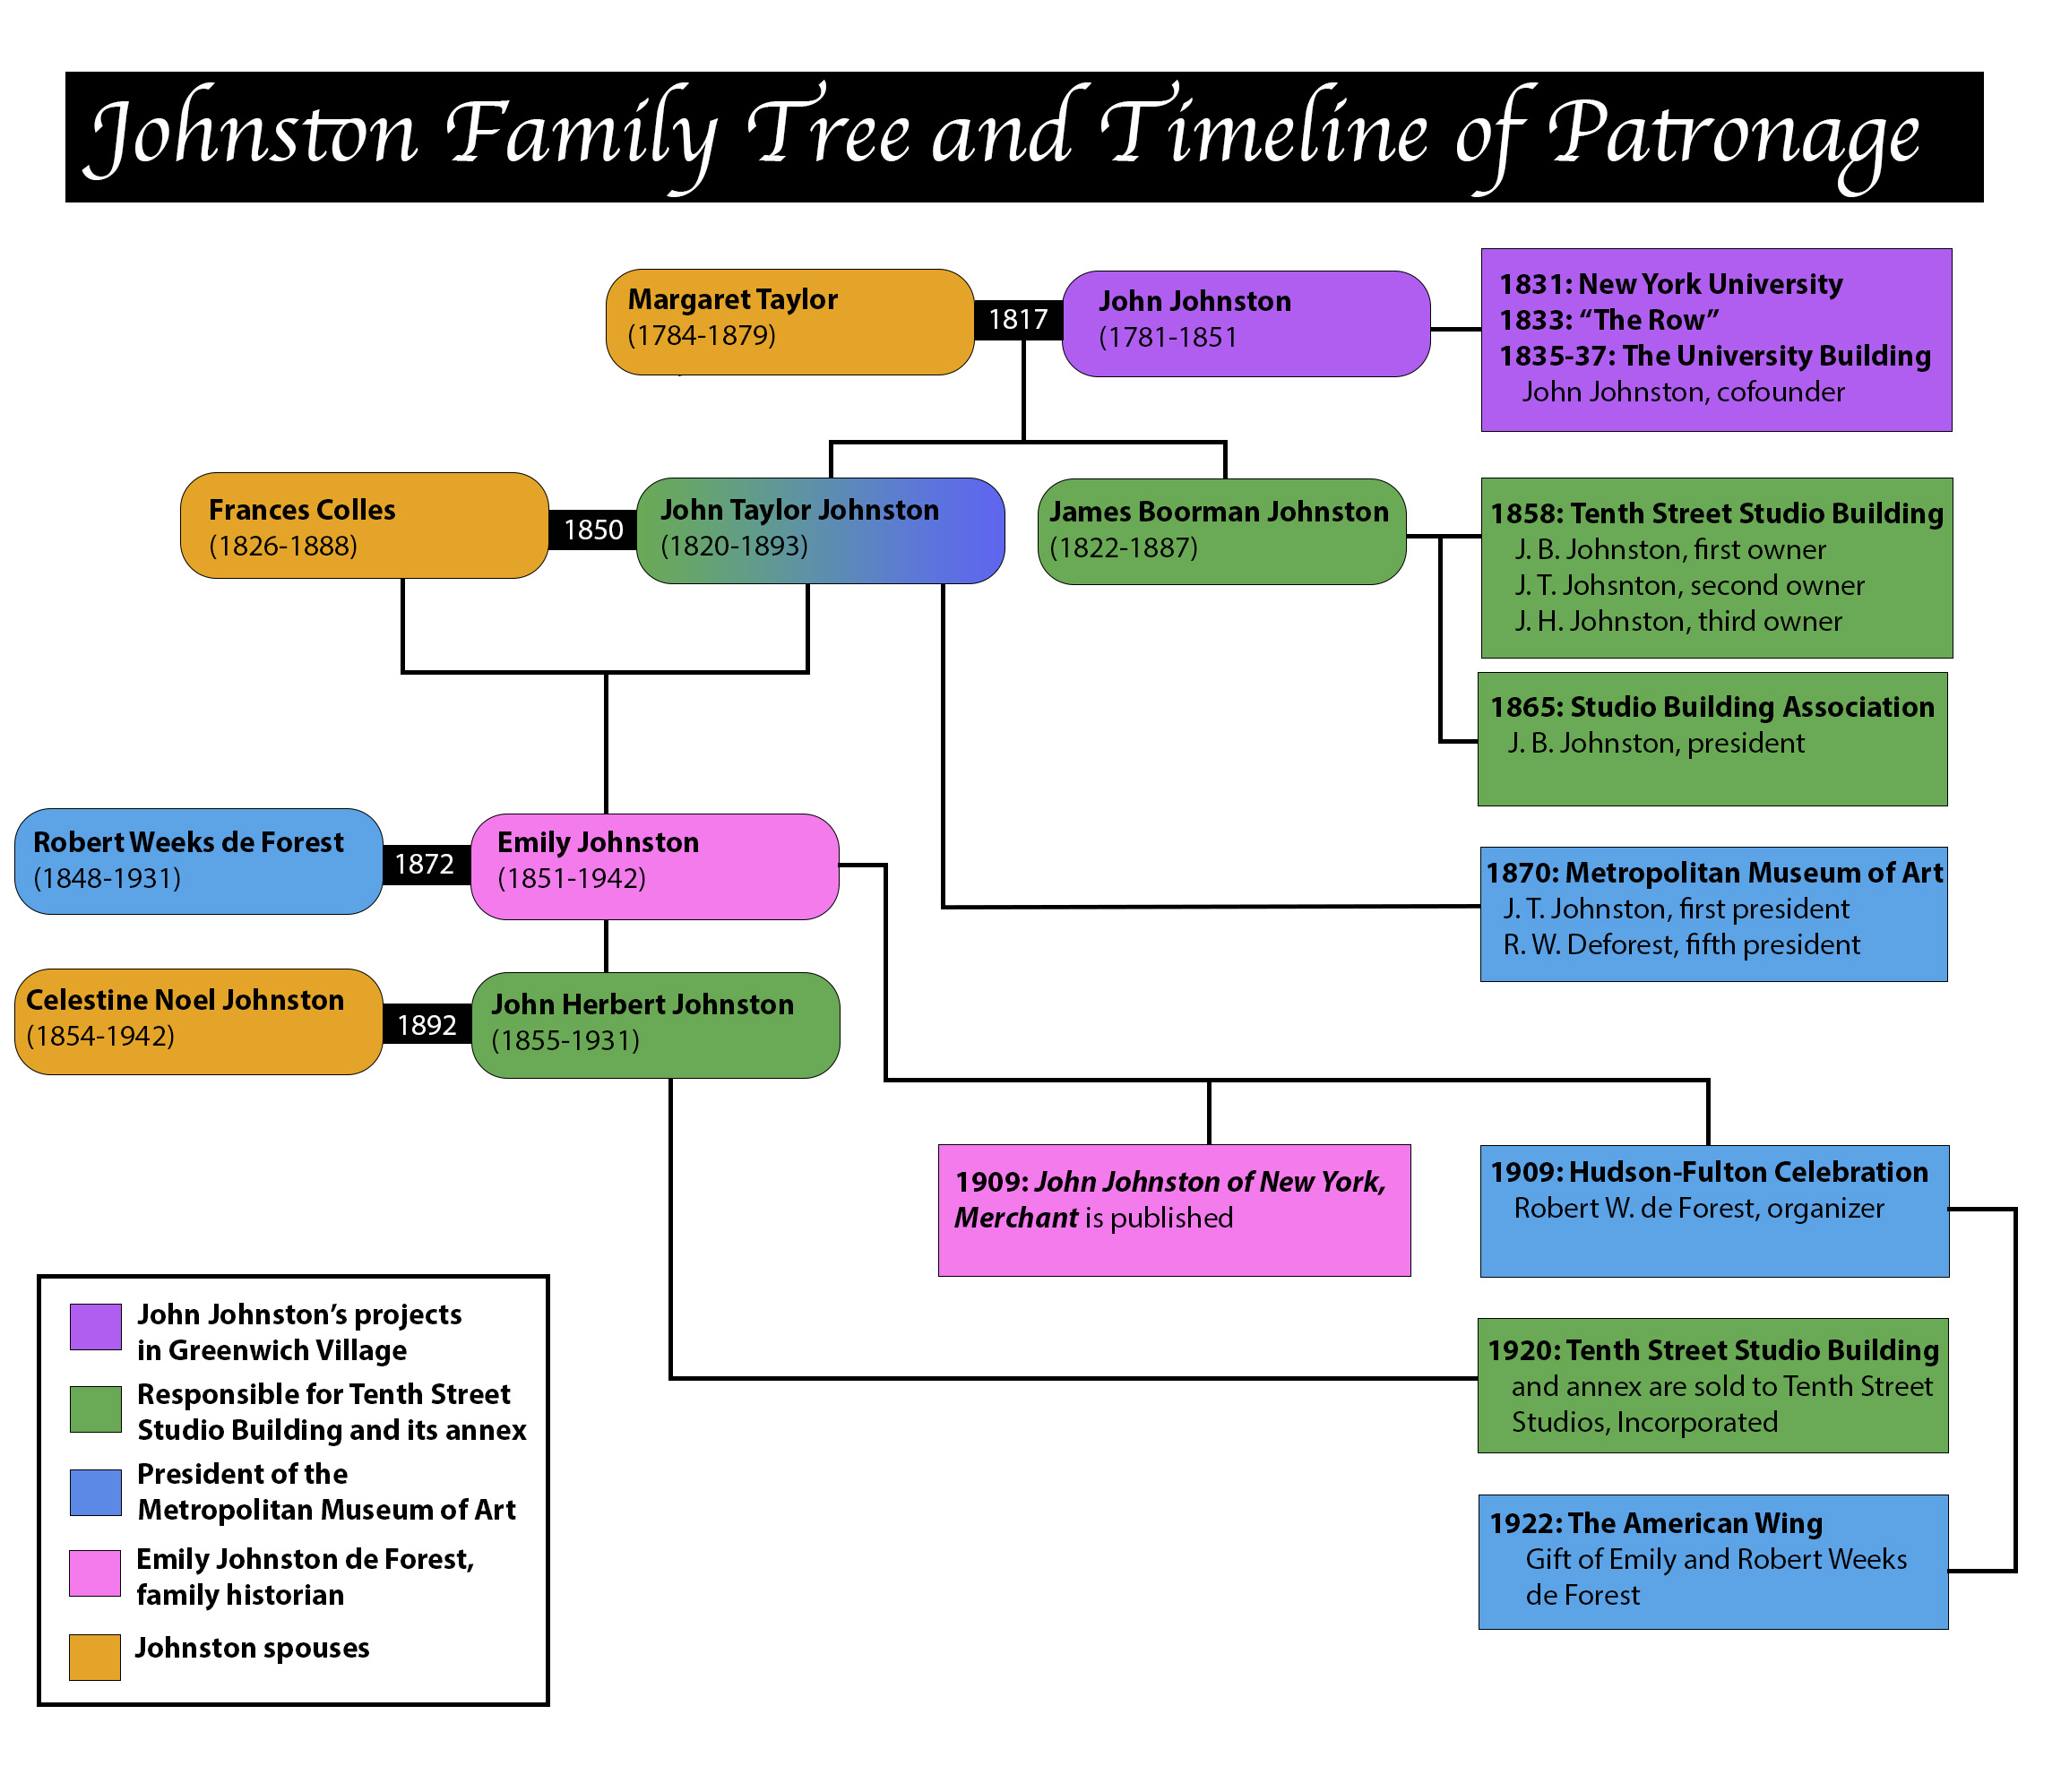 Family tree color coded represent the following individuals and initiatives: John Johnston's projects in Greenwich Village (purple); Responsible for Tenth Street Studio Building and its annex (green); President of the Metropolitan Museum of Art (blue); Emily Johnston de Forest, family historian (pink); and Johnston spouses (orange). 